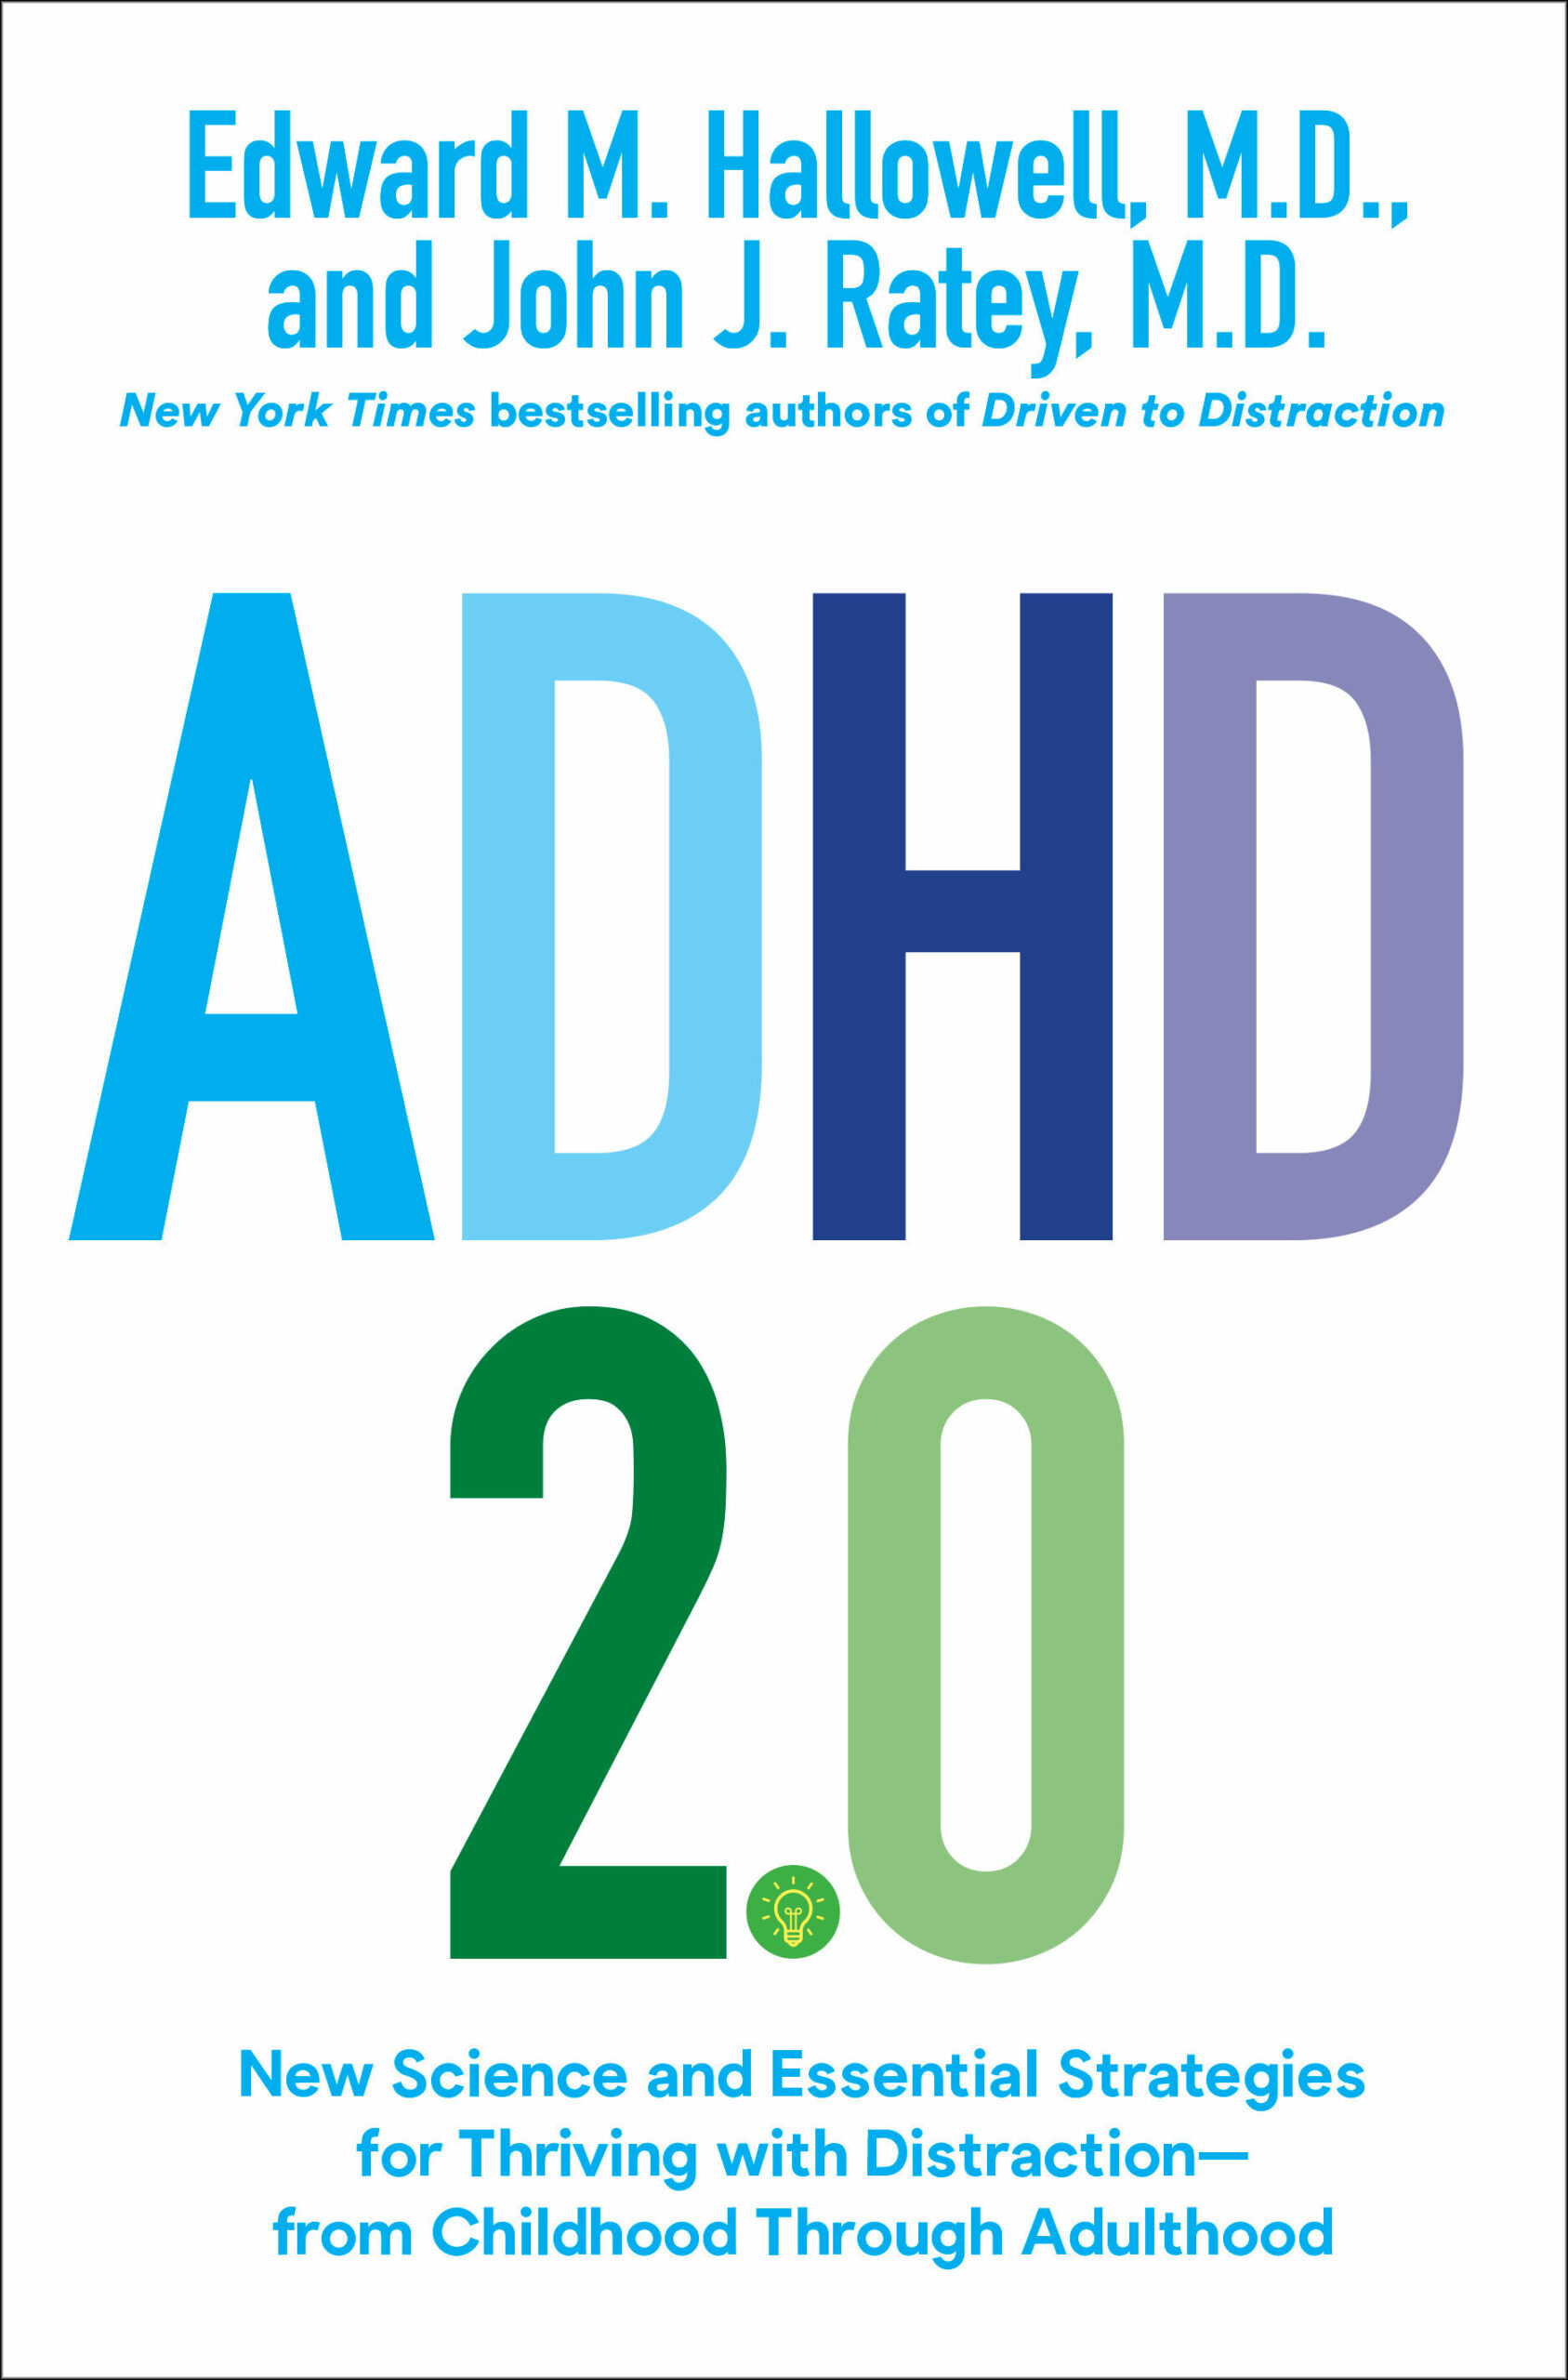 ADHD 2.0: New Science and Essential Strategies for Thriving with Distraction - from Childhood through Adulthood